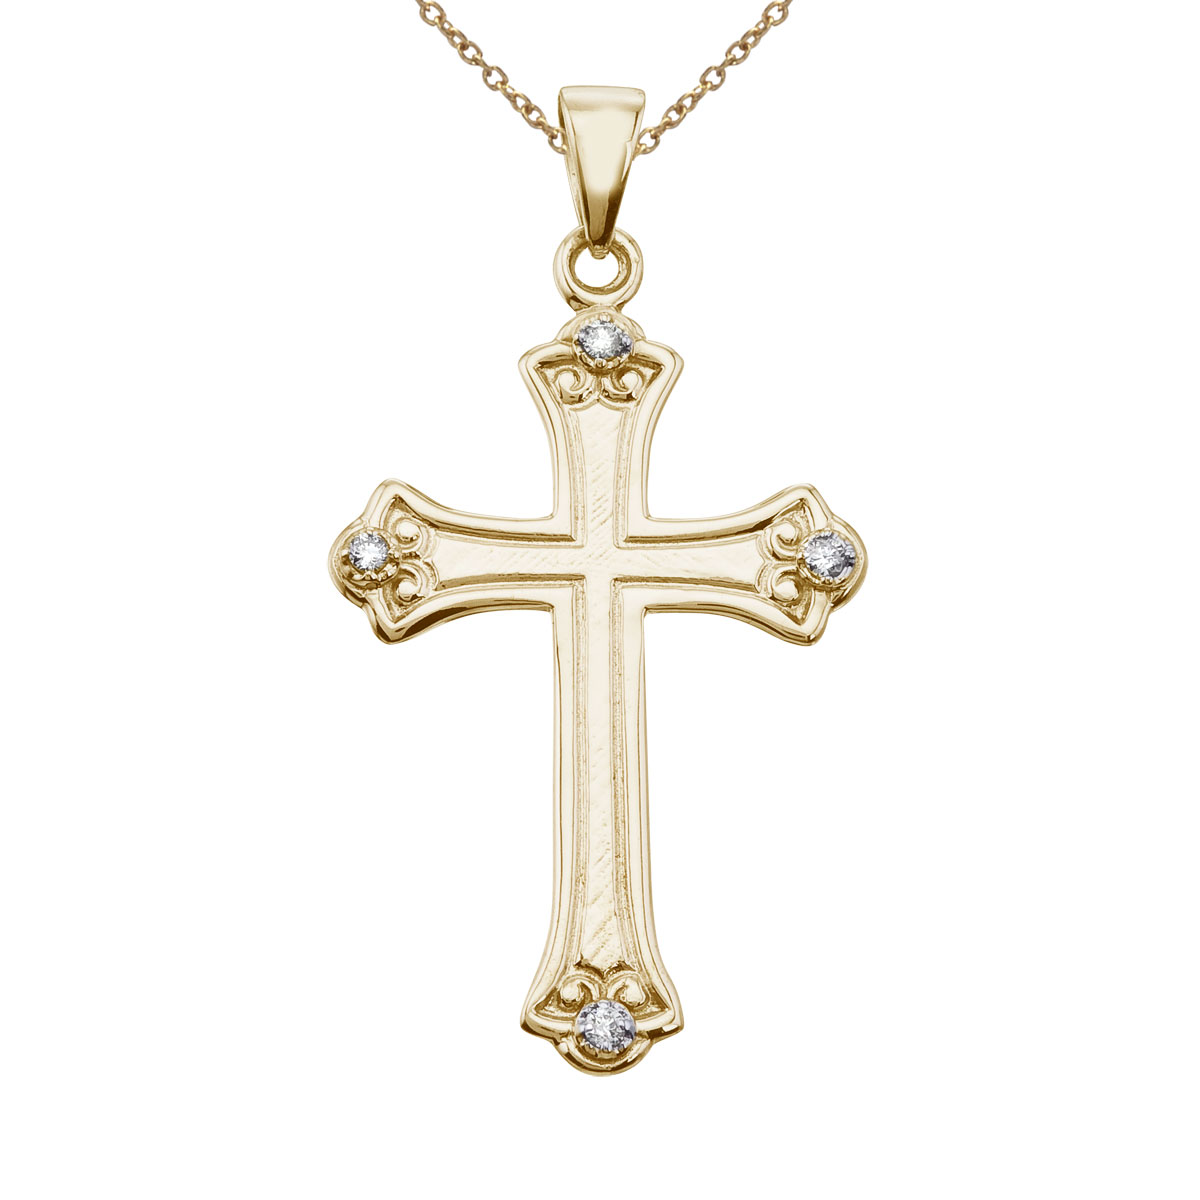 JCX2955: 14k yellow gold cross. A great gift for all ages.